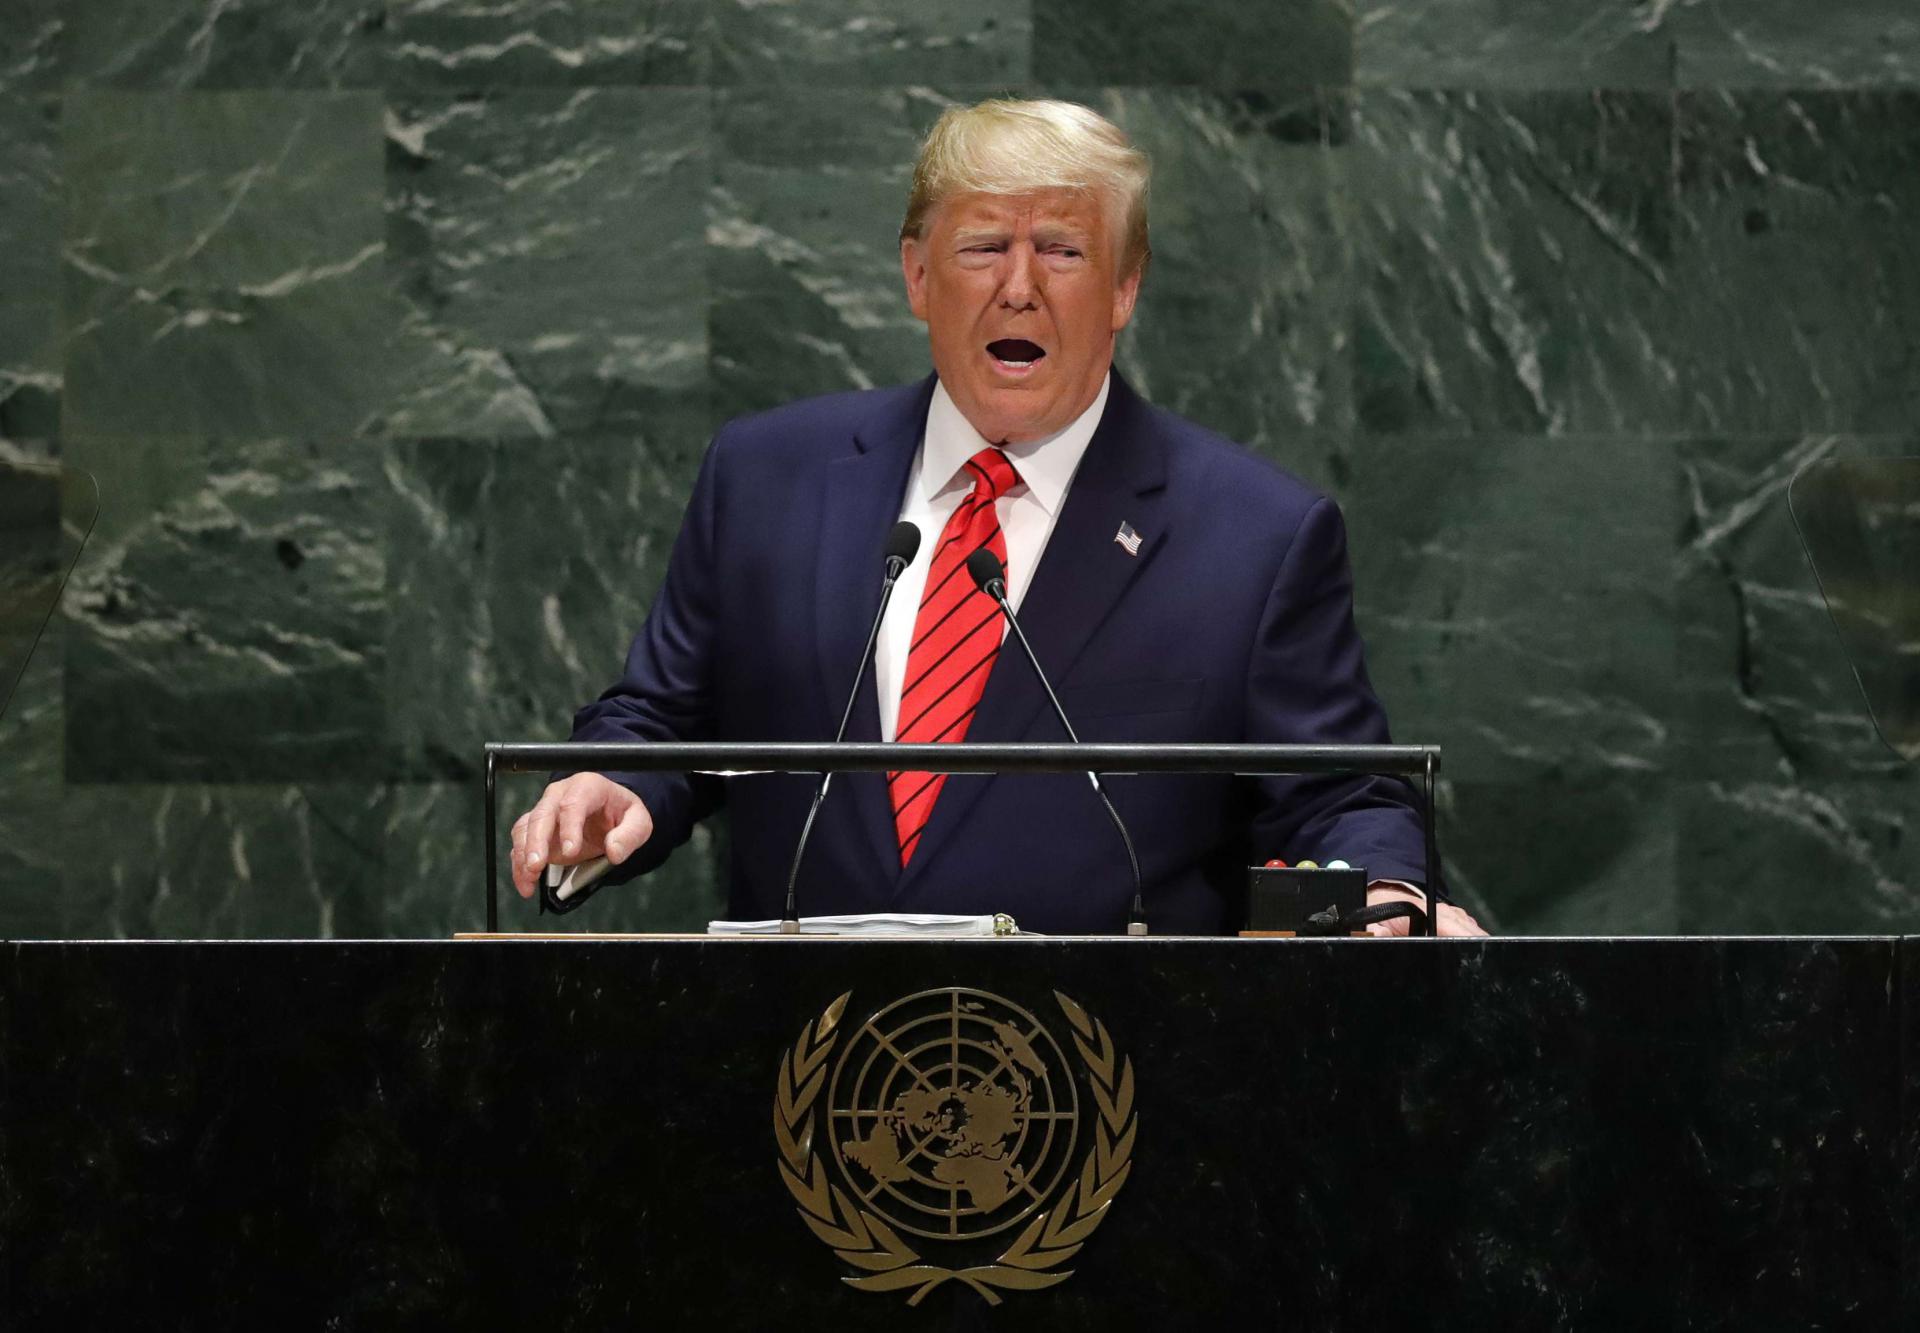 US President Donald Trump addresses the 74th session of the United Nations General Assembly